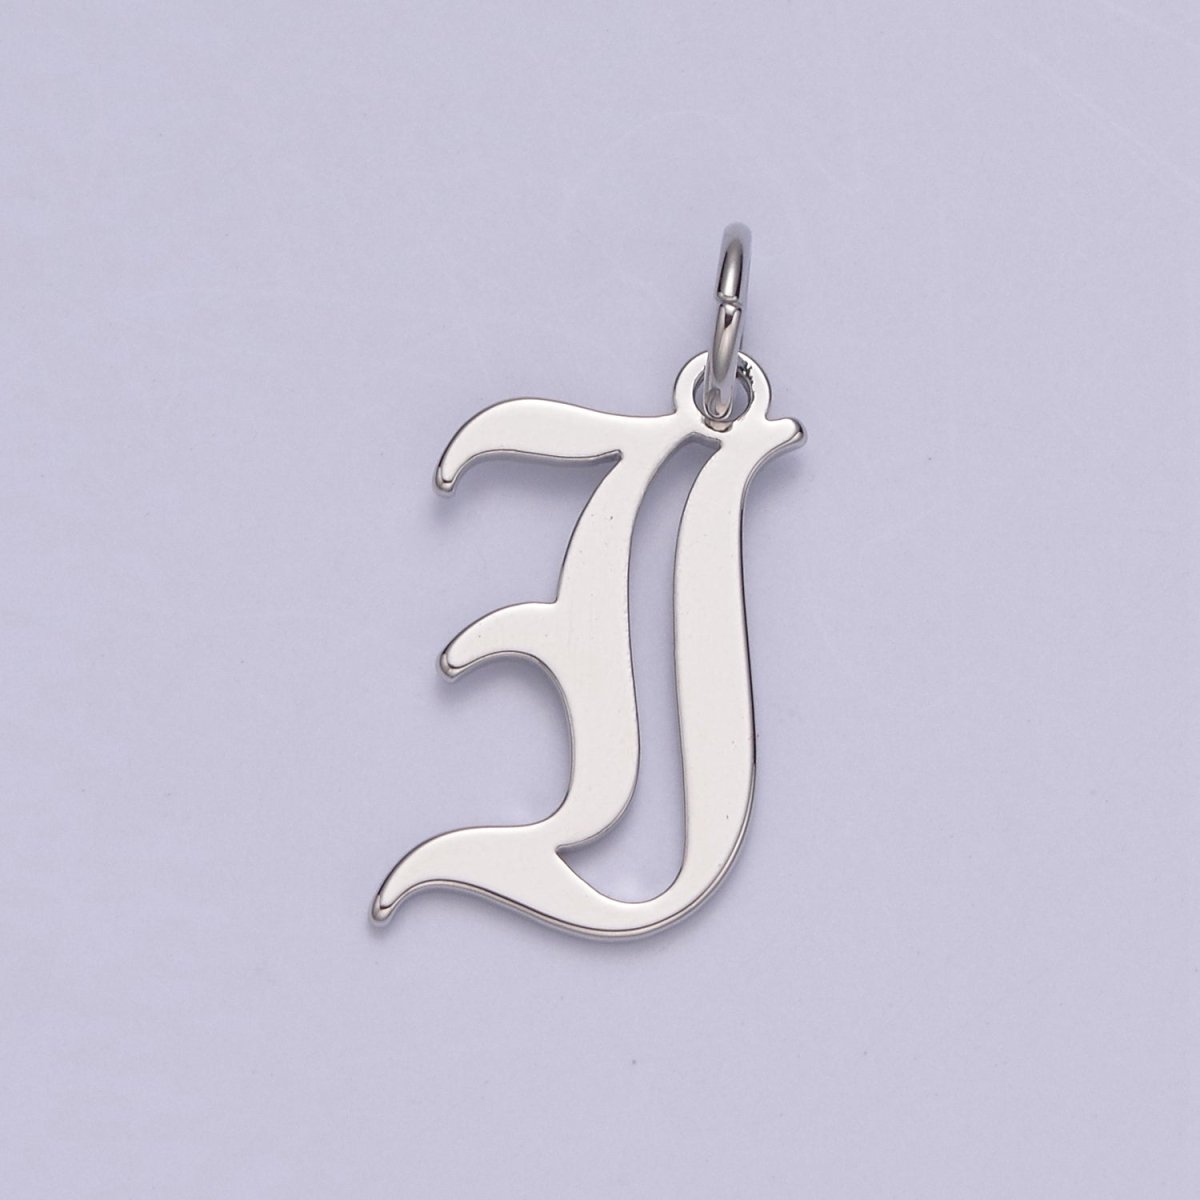 Gothic Letter Charm, Alphabet Charm, Silver Letter Charm, 26 Letters Initial Charms Old English Letter Pendant W-028~W-054 - DLUXCA